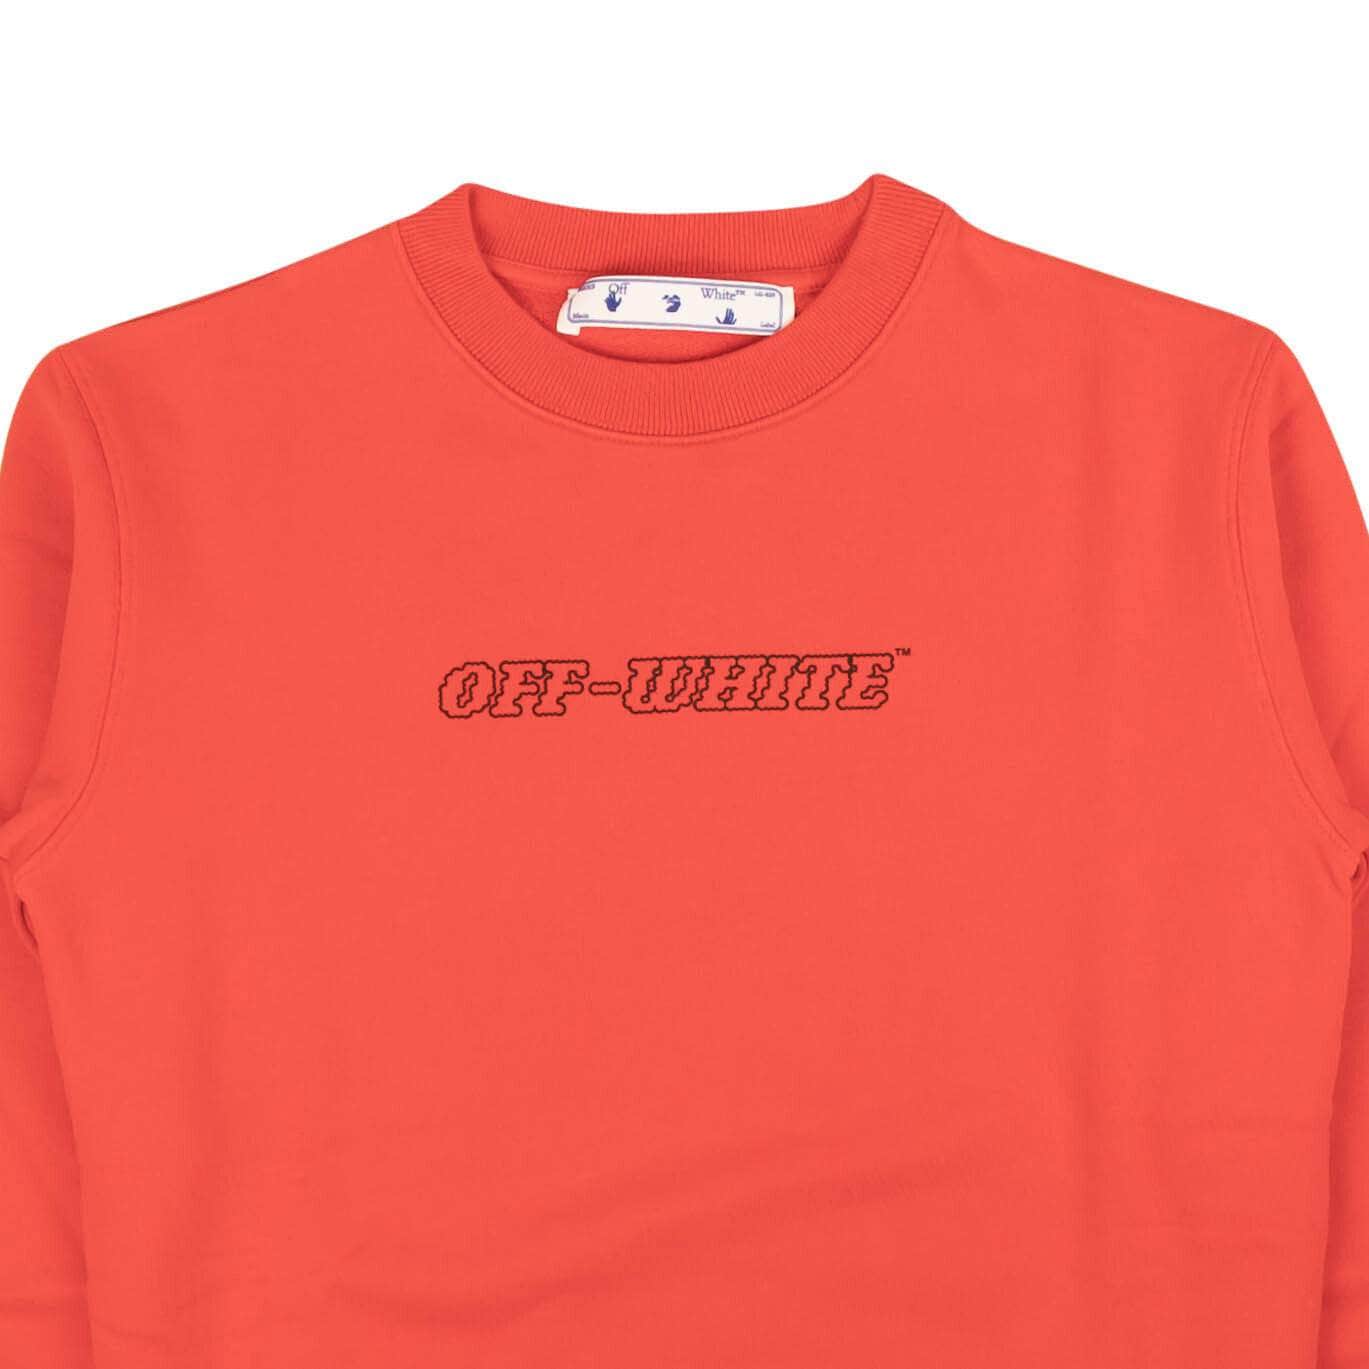 Off-White c/o Virgil Abloh 250-500, channelenable-all, chicmi, couponcollection, gender-mens, main-clothing, mens-crewnecks, mens-shoes, off-white, off-white-c-o-virgil-abloh, owjuly4, size-s, size-xxs Fiery Red And Nude Pascal Crewneck